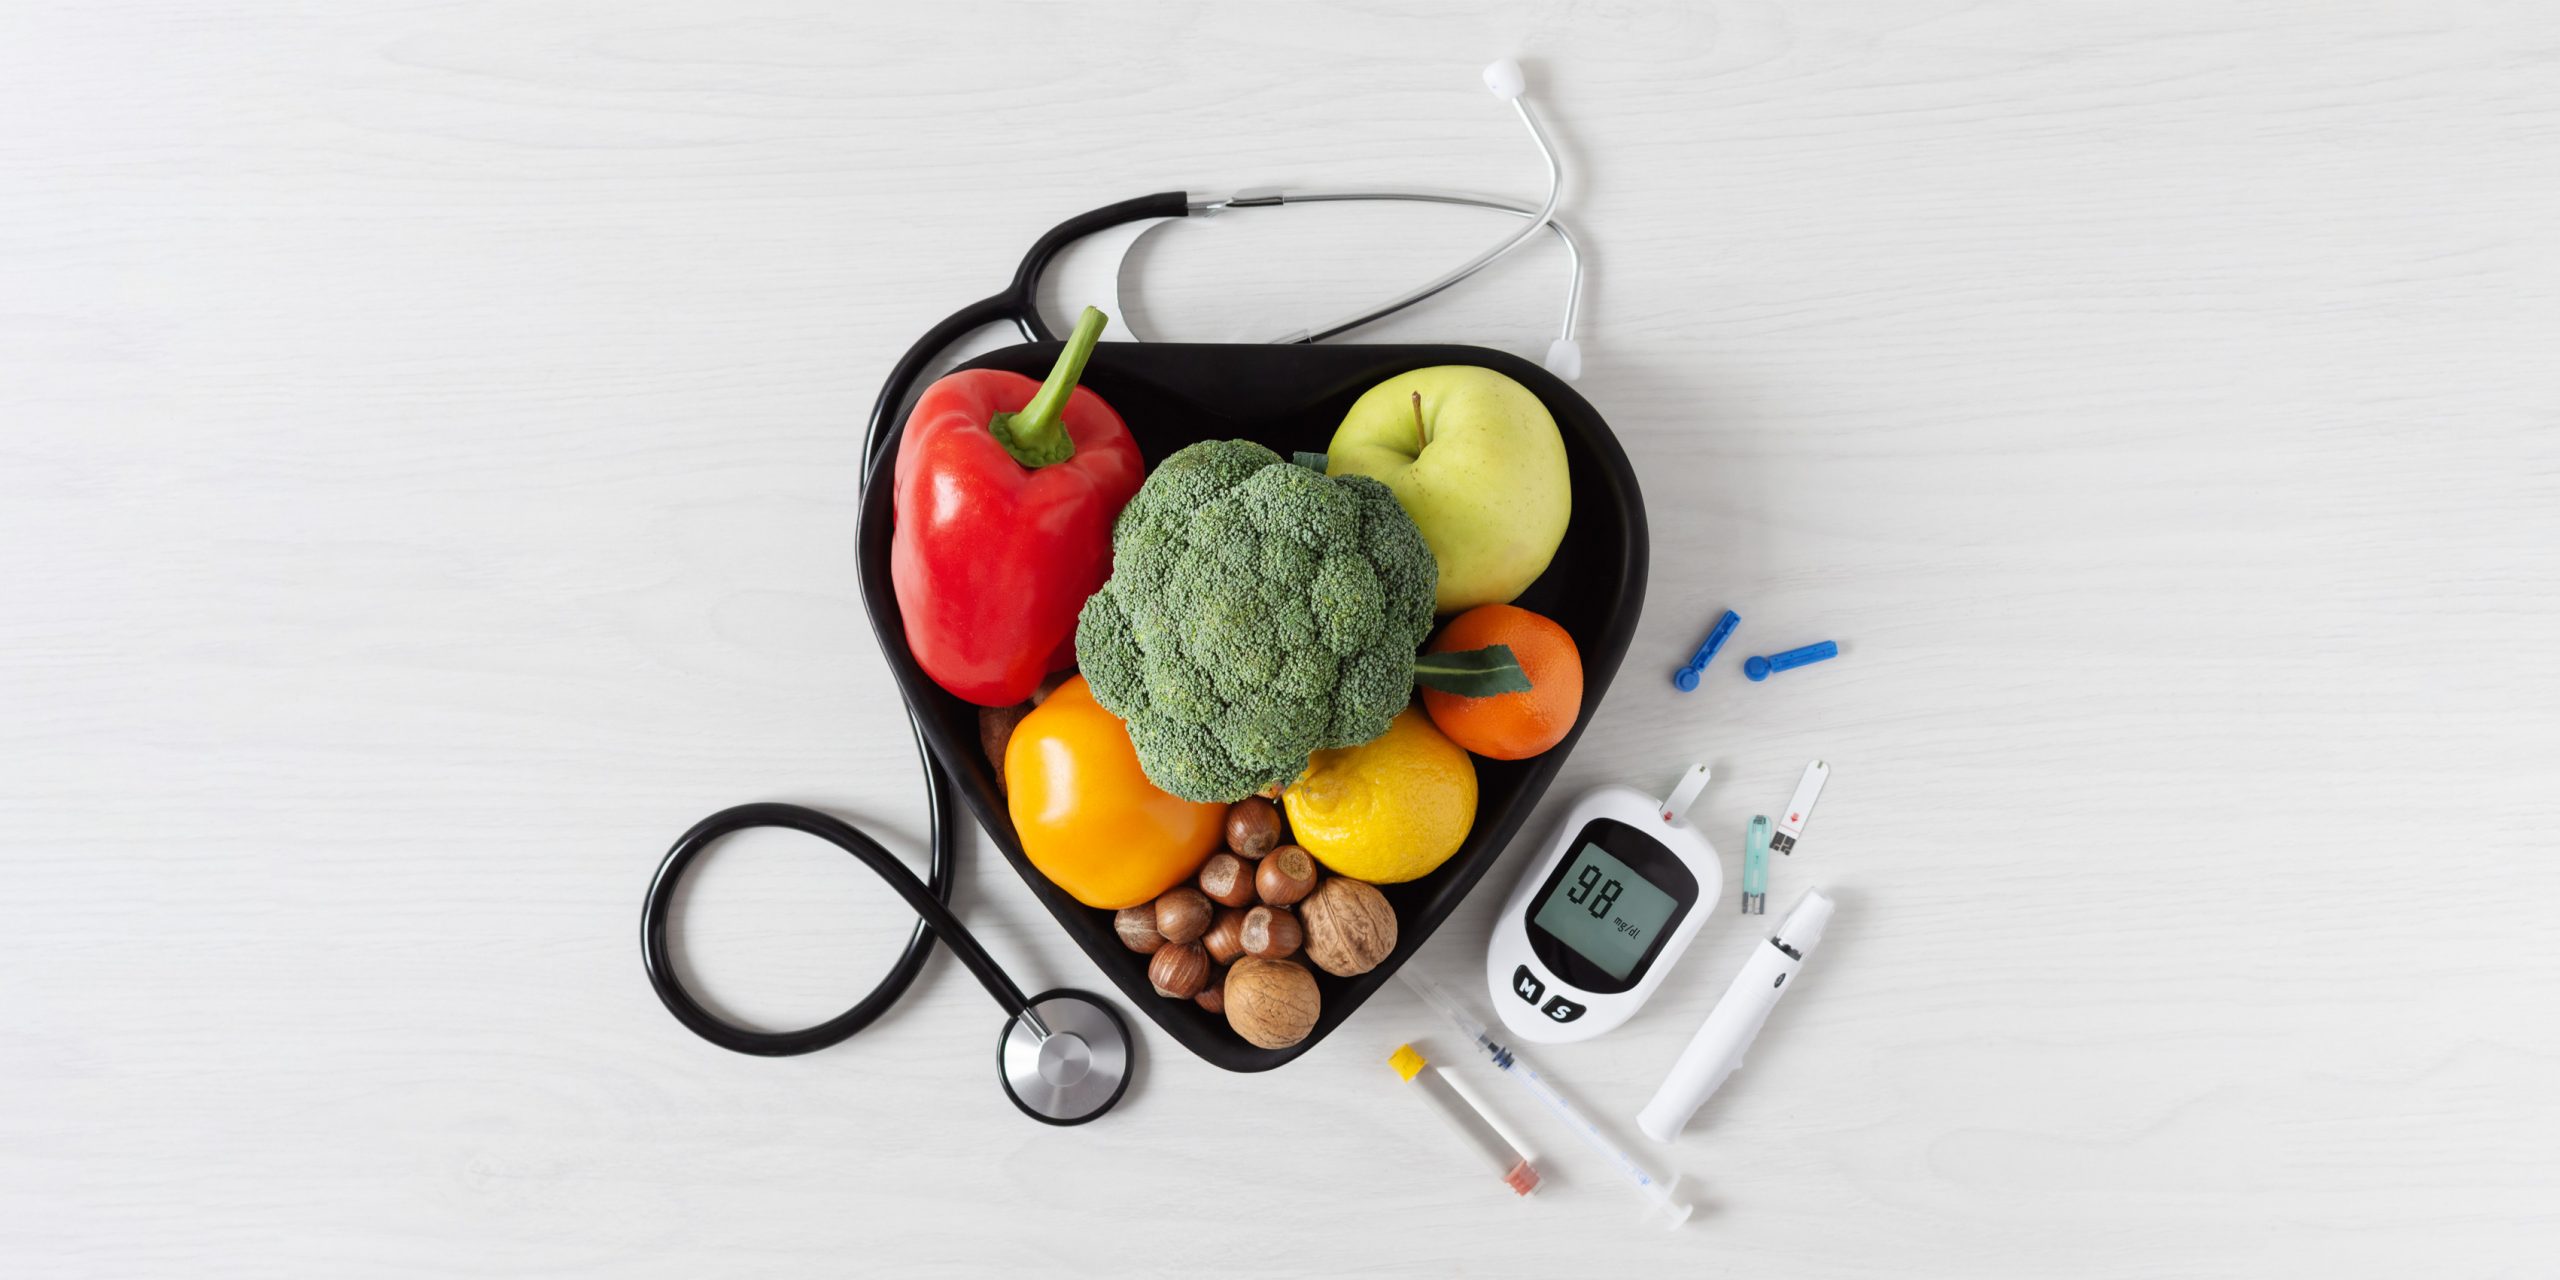 How Different Is A Prediabetes Diet From A Regular Diet